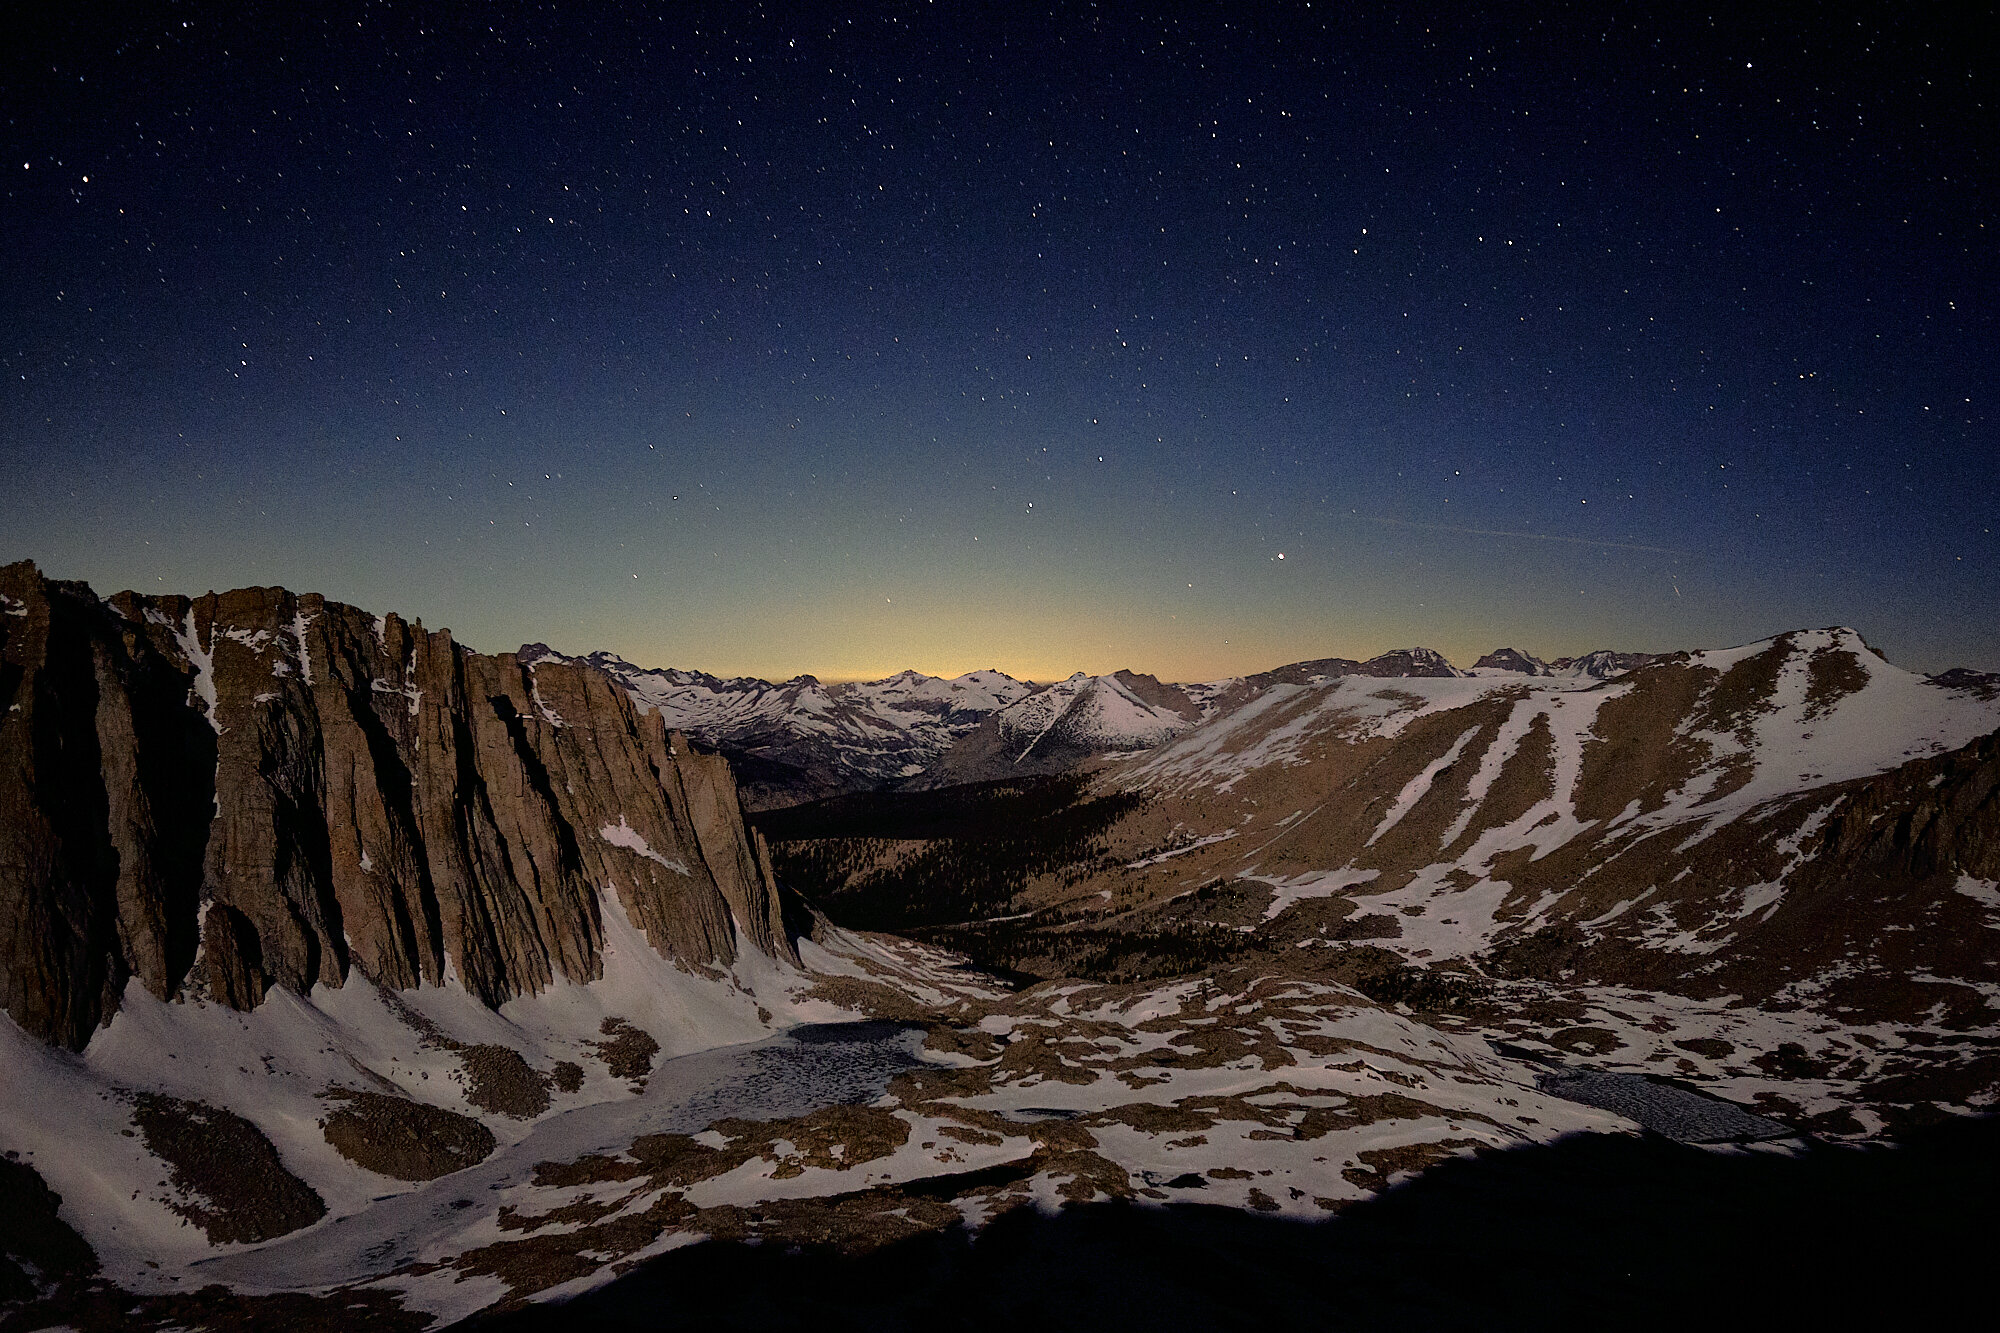  Looking west from the climb up Mt. Whitney at 2:45 am. The climb to the summit is an optional 8-mile spur trail. | 6/26/19 Mile 767.0, 12,512' 